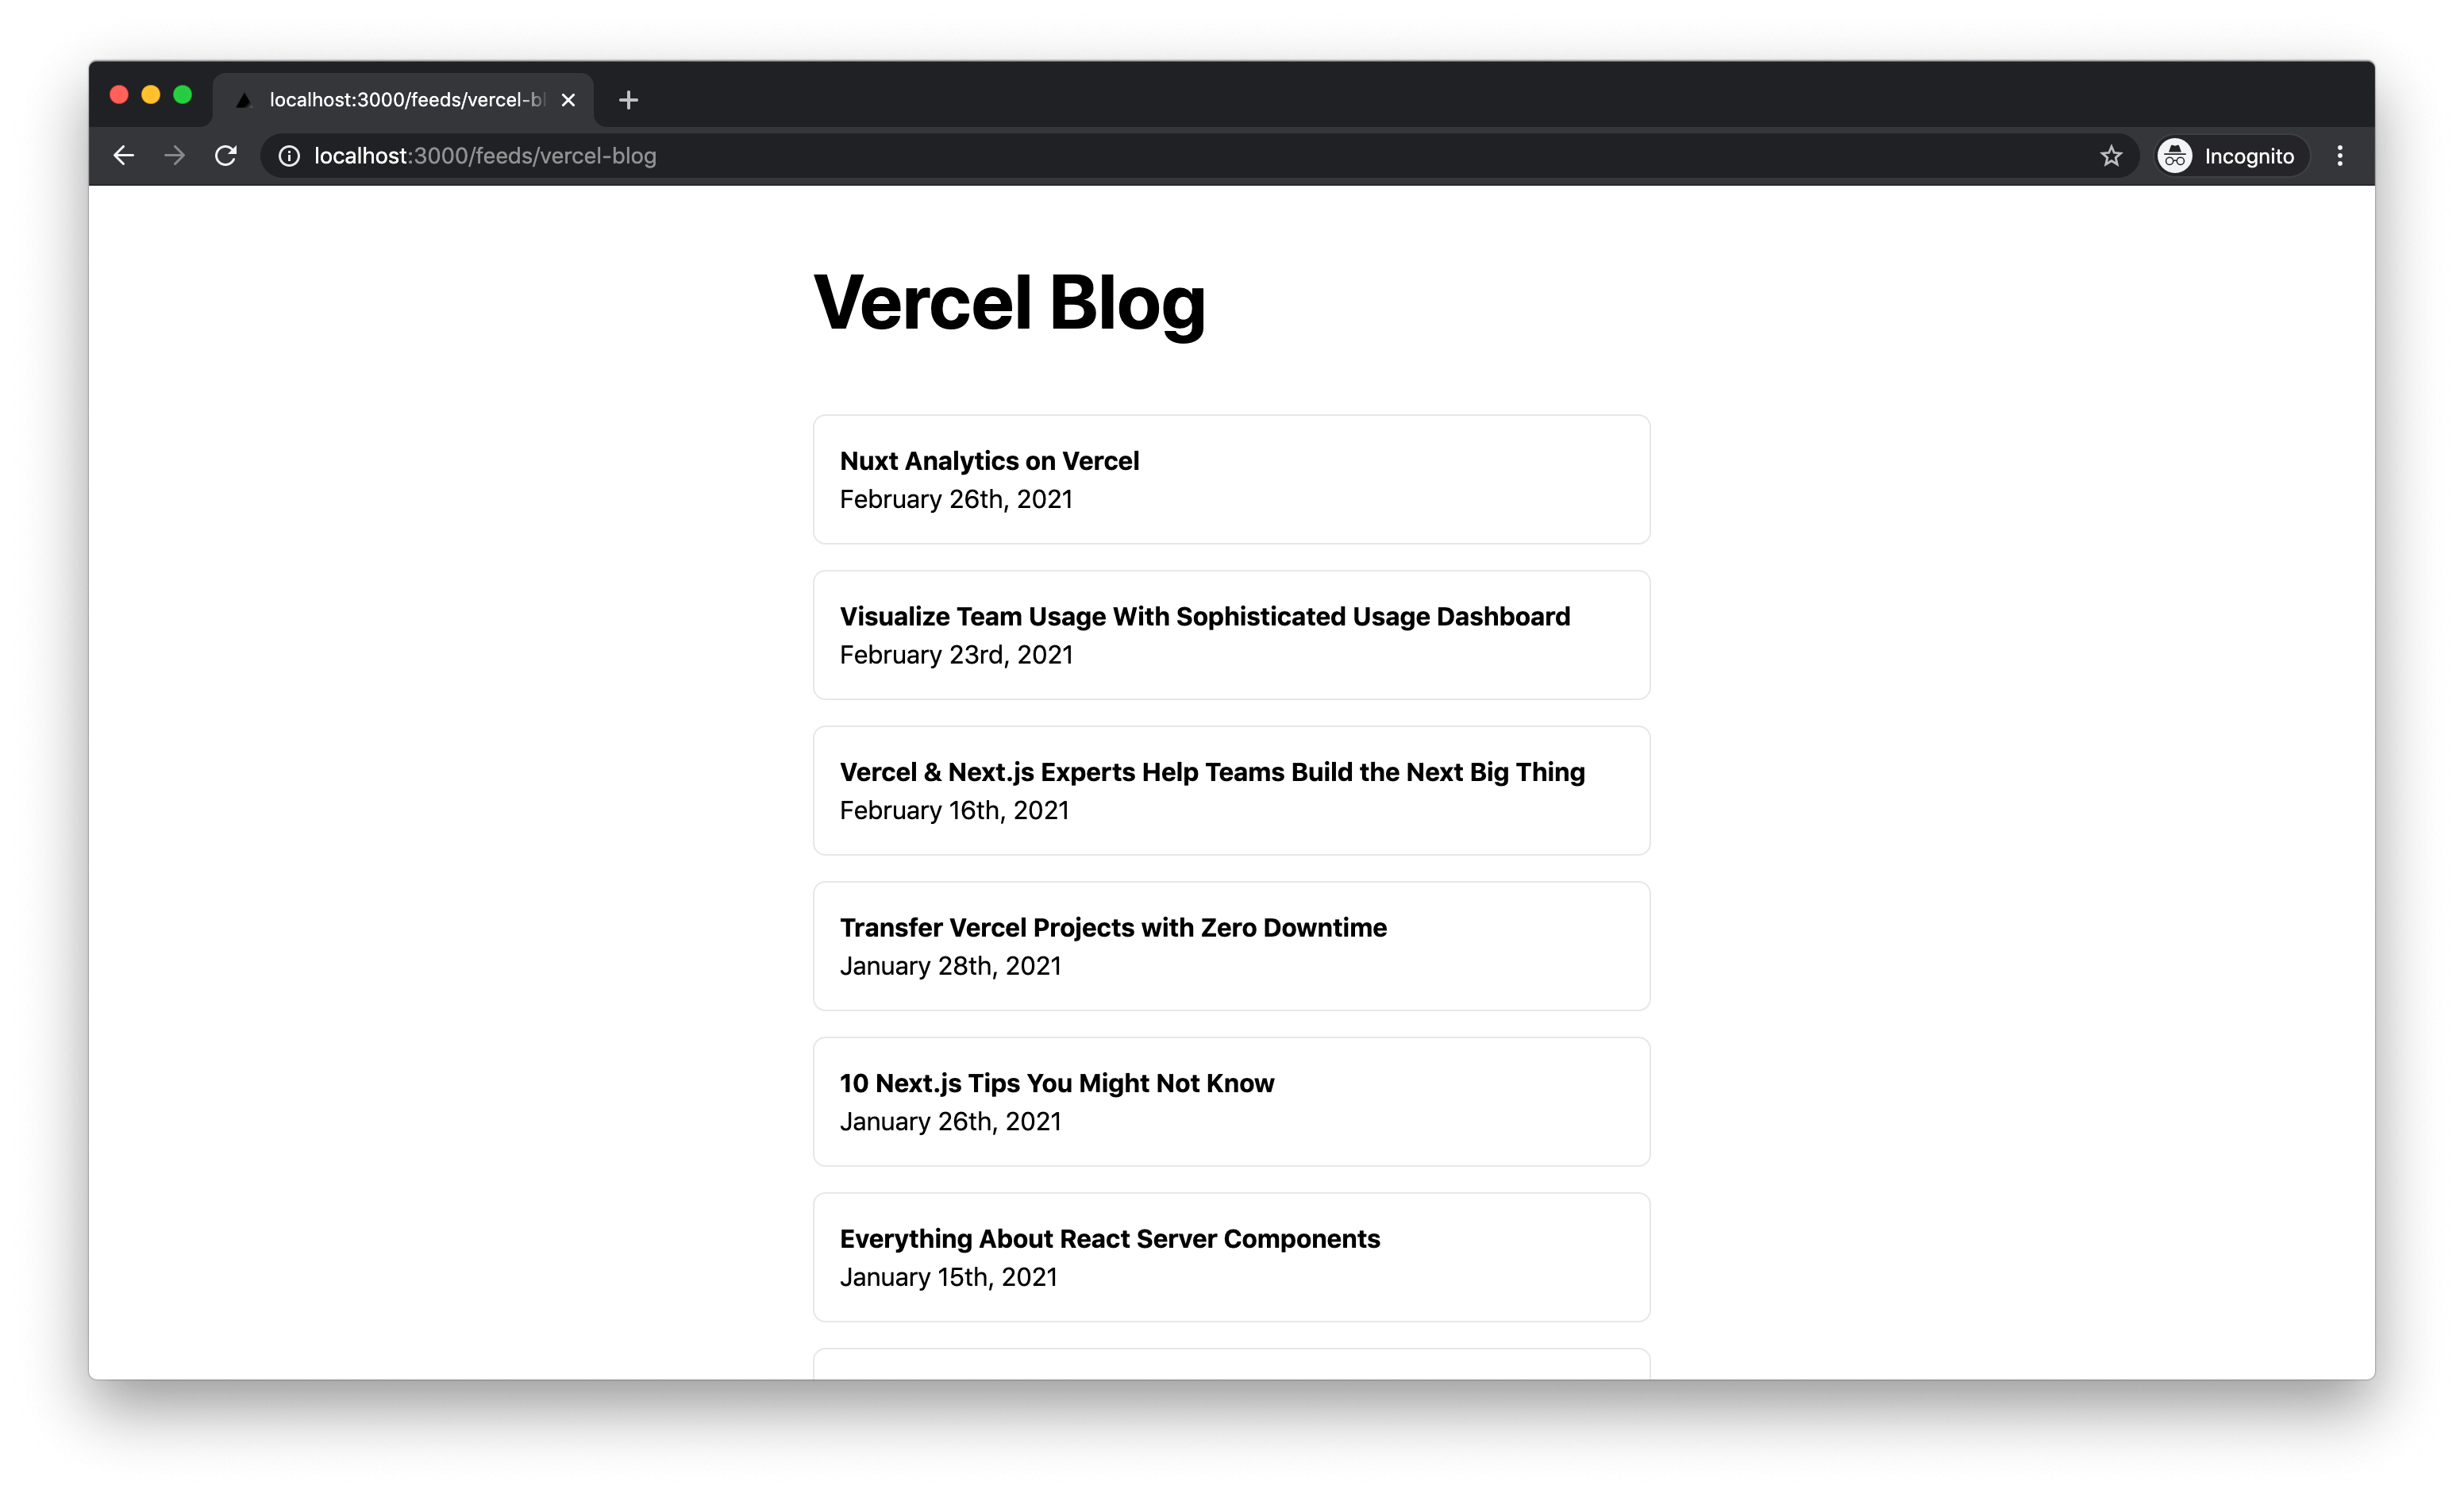 Feed detail page